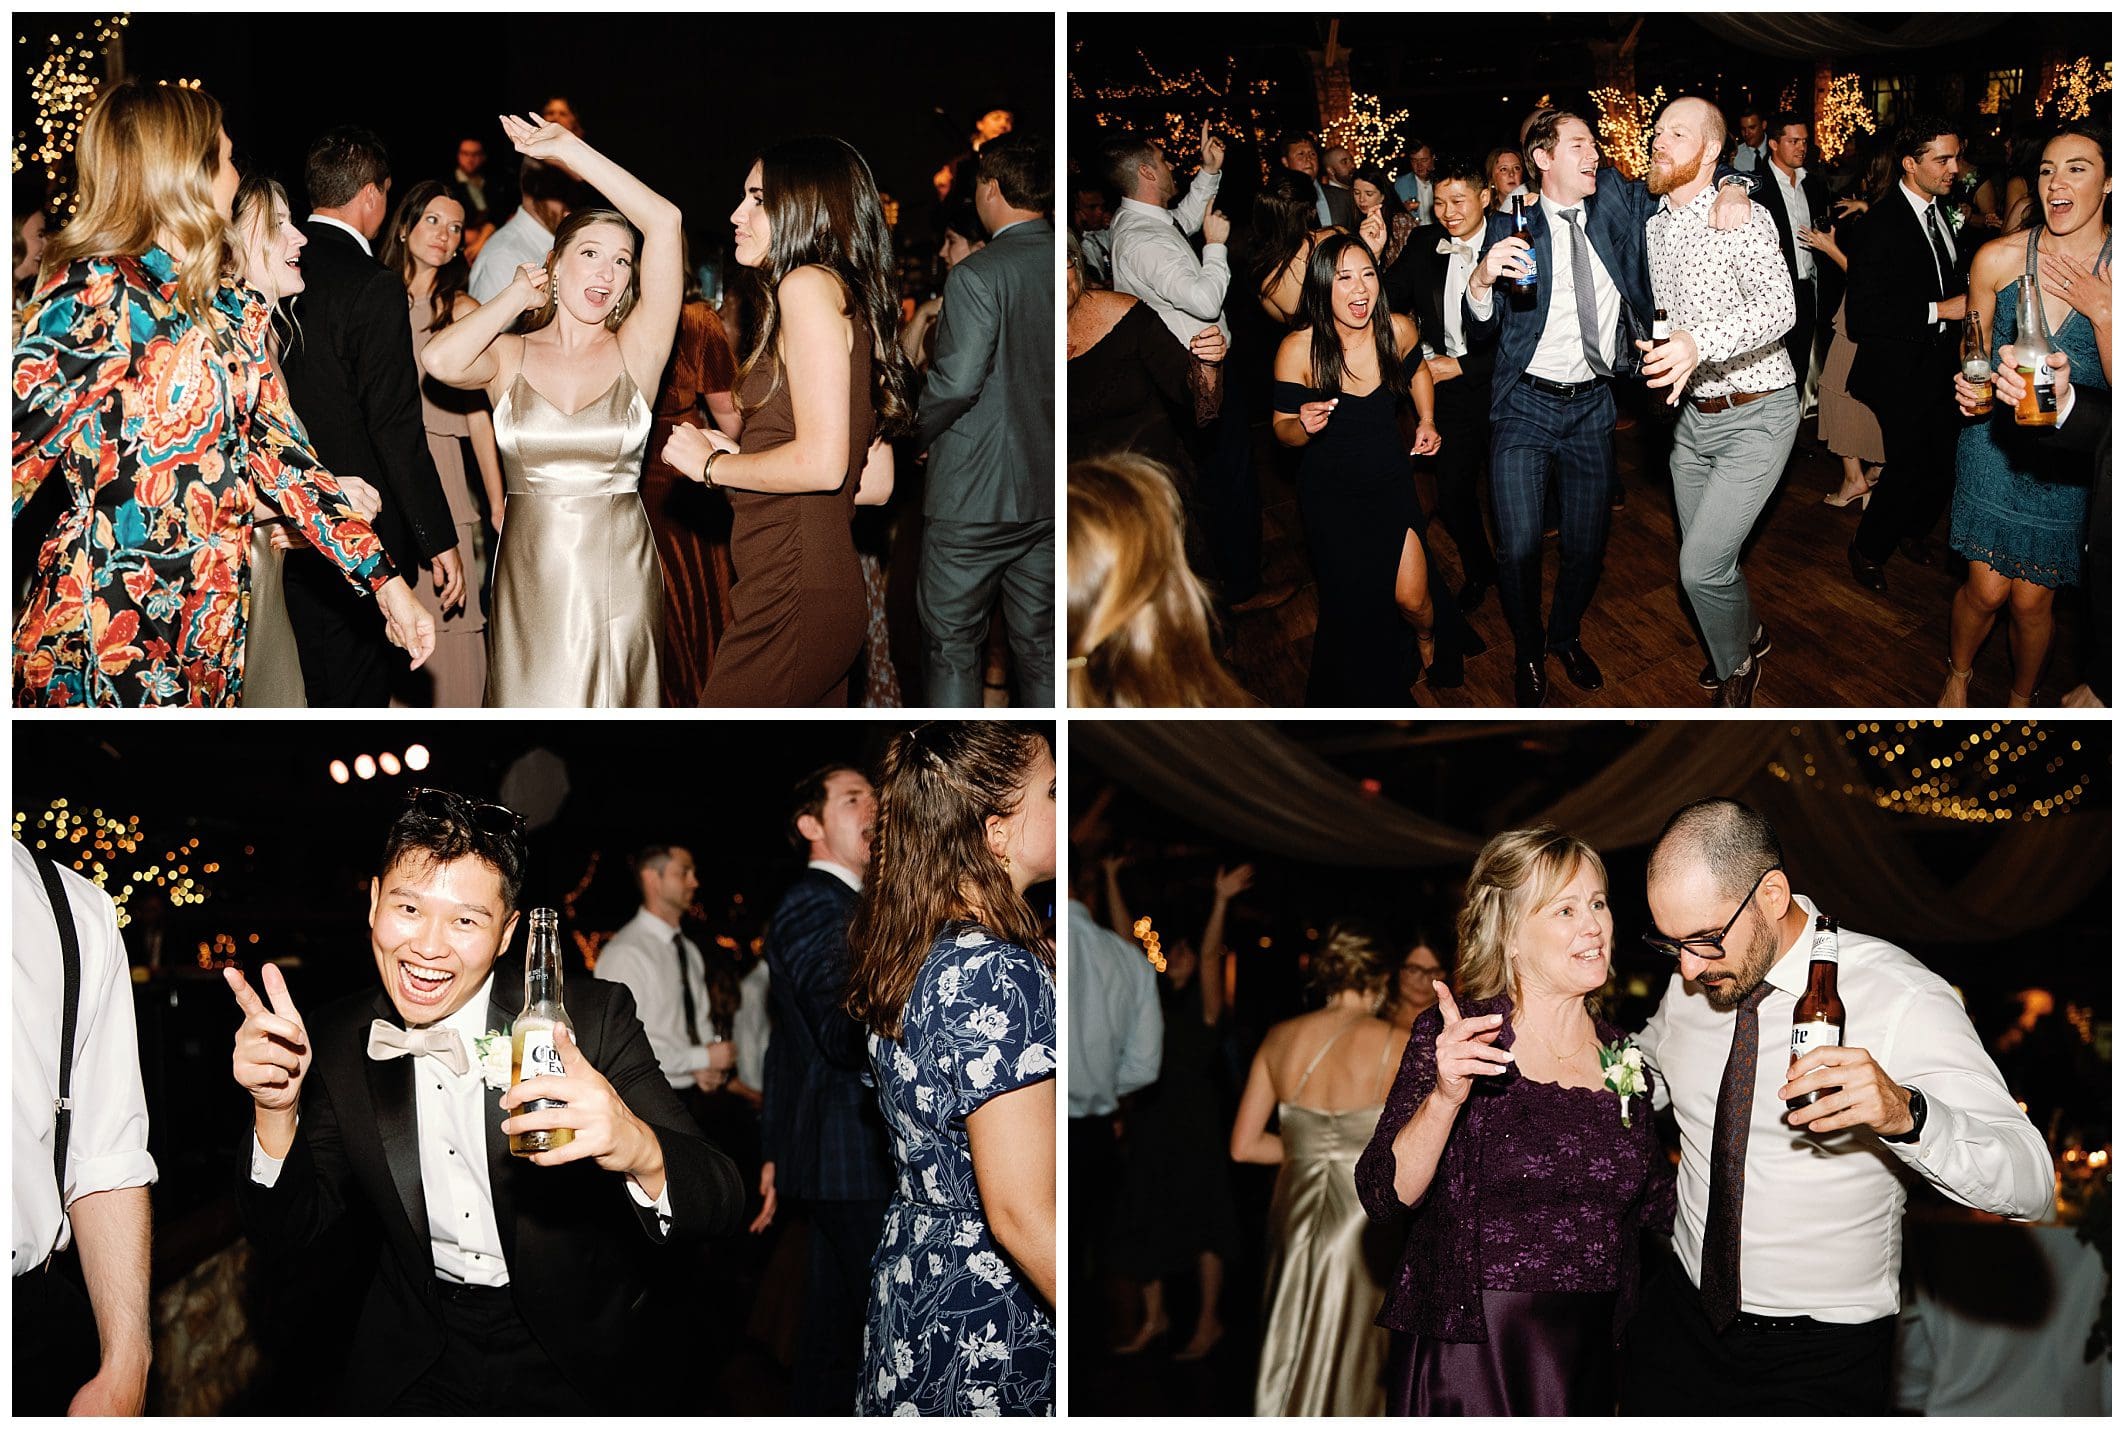 A group of people dancing at a fall wedding reception.